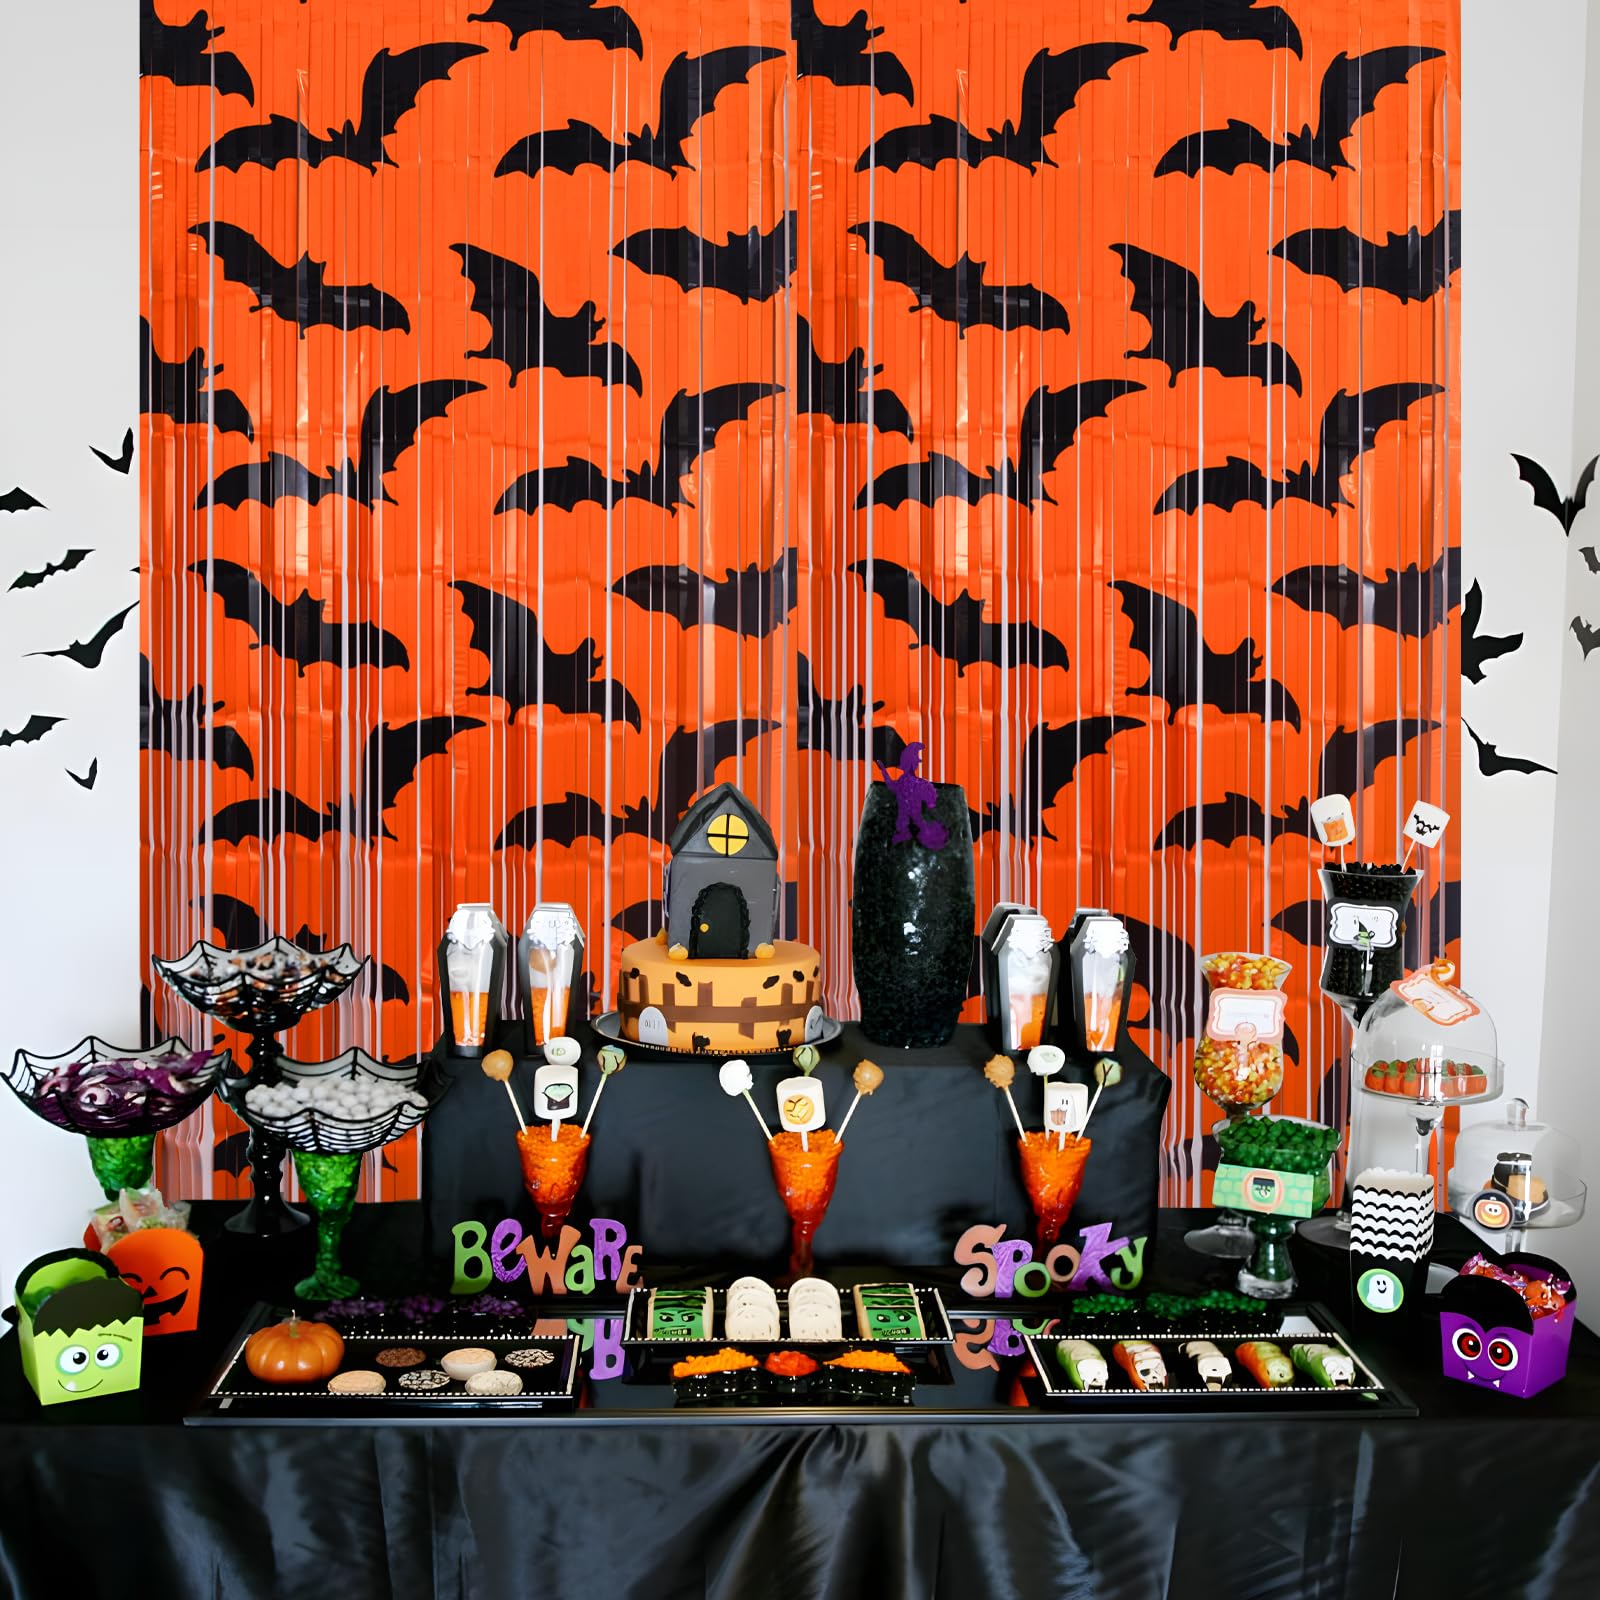 Mega-L Halloween Party Decorations, 2 Packs Black Bat Pattern Orange Background Photo Booth Props, 3.3 x 6.6 ft Halloween Foil Fringe Curtains, Halloween Photo Backdrop Streamers Party Supplies